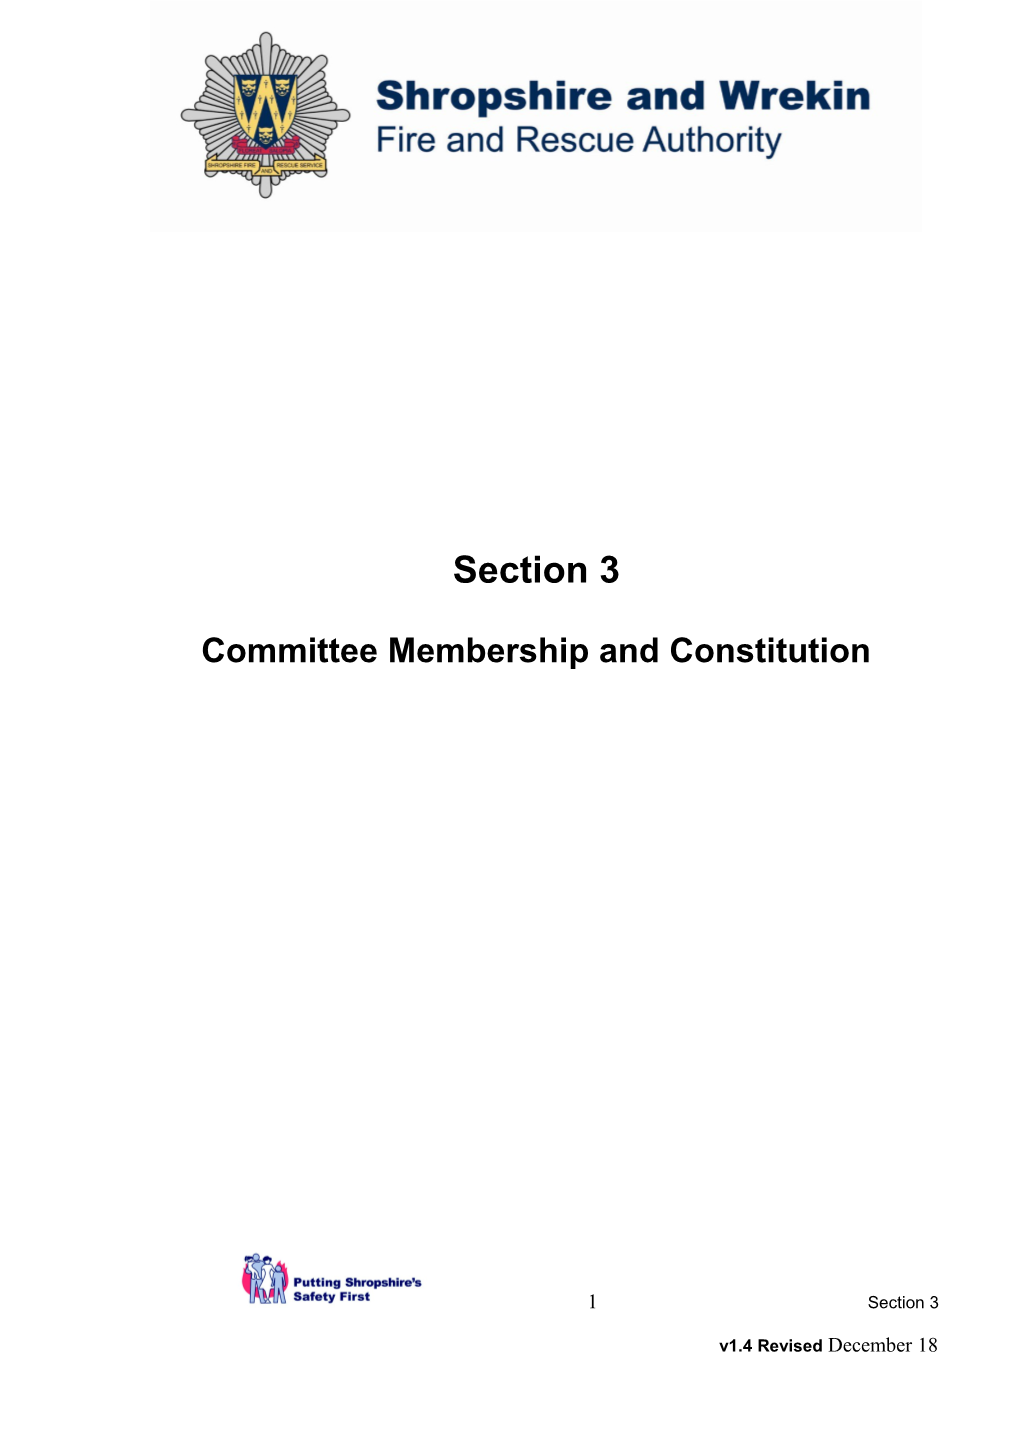 Committee Membership and Constitution